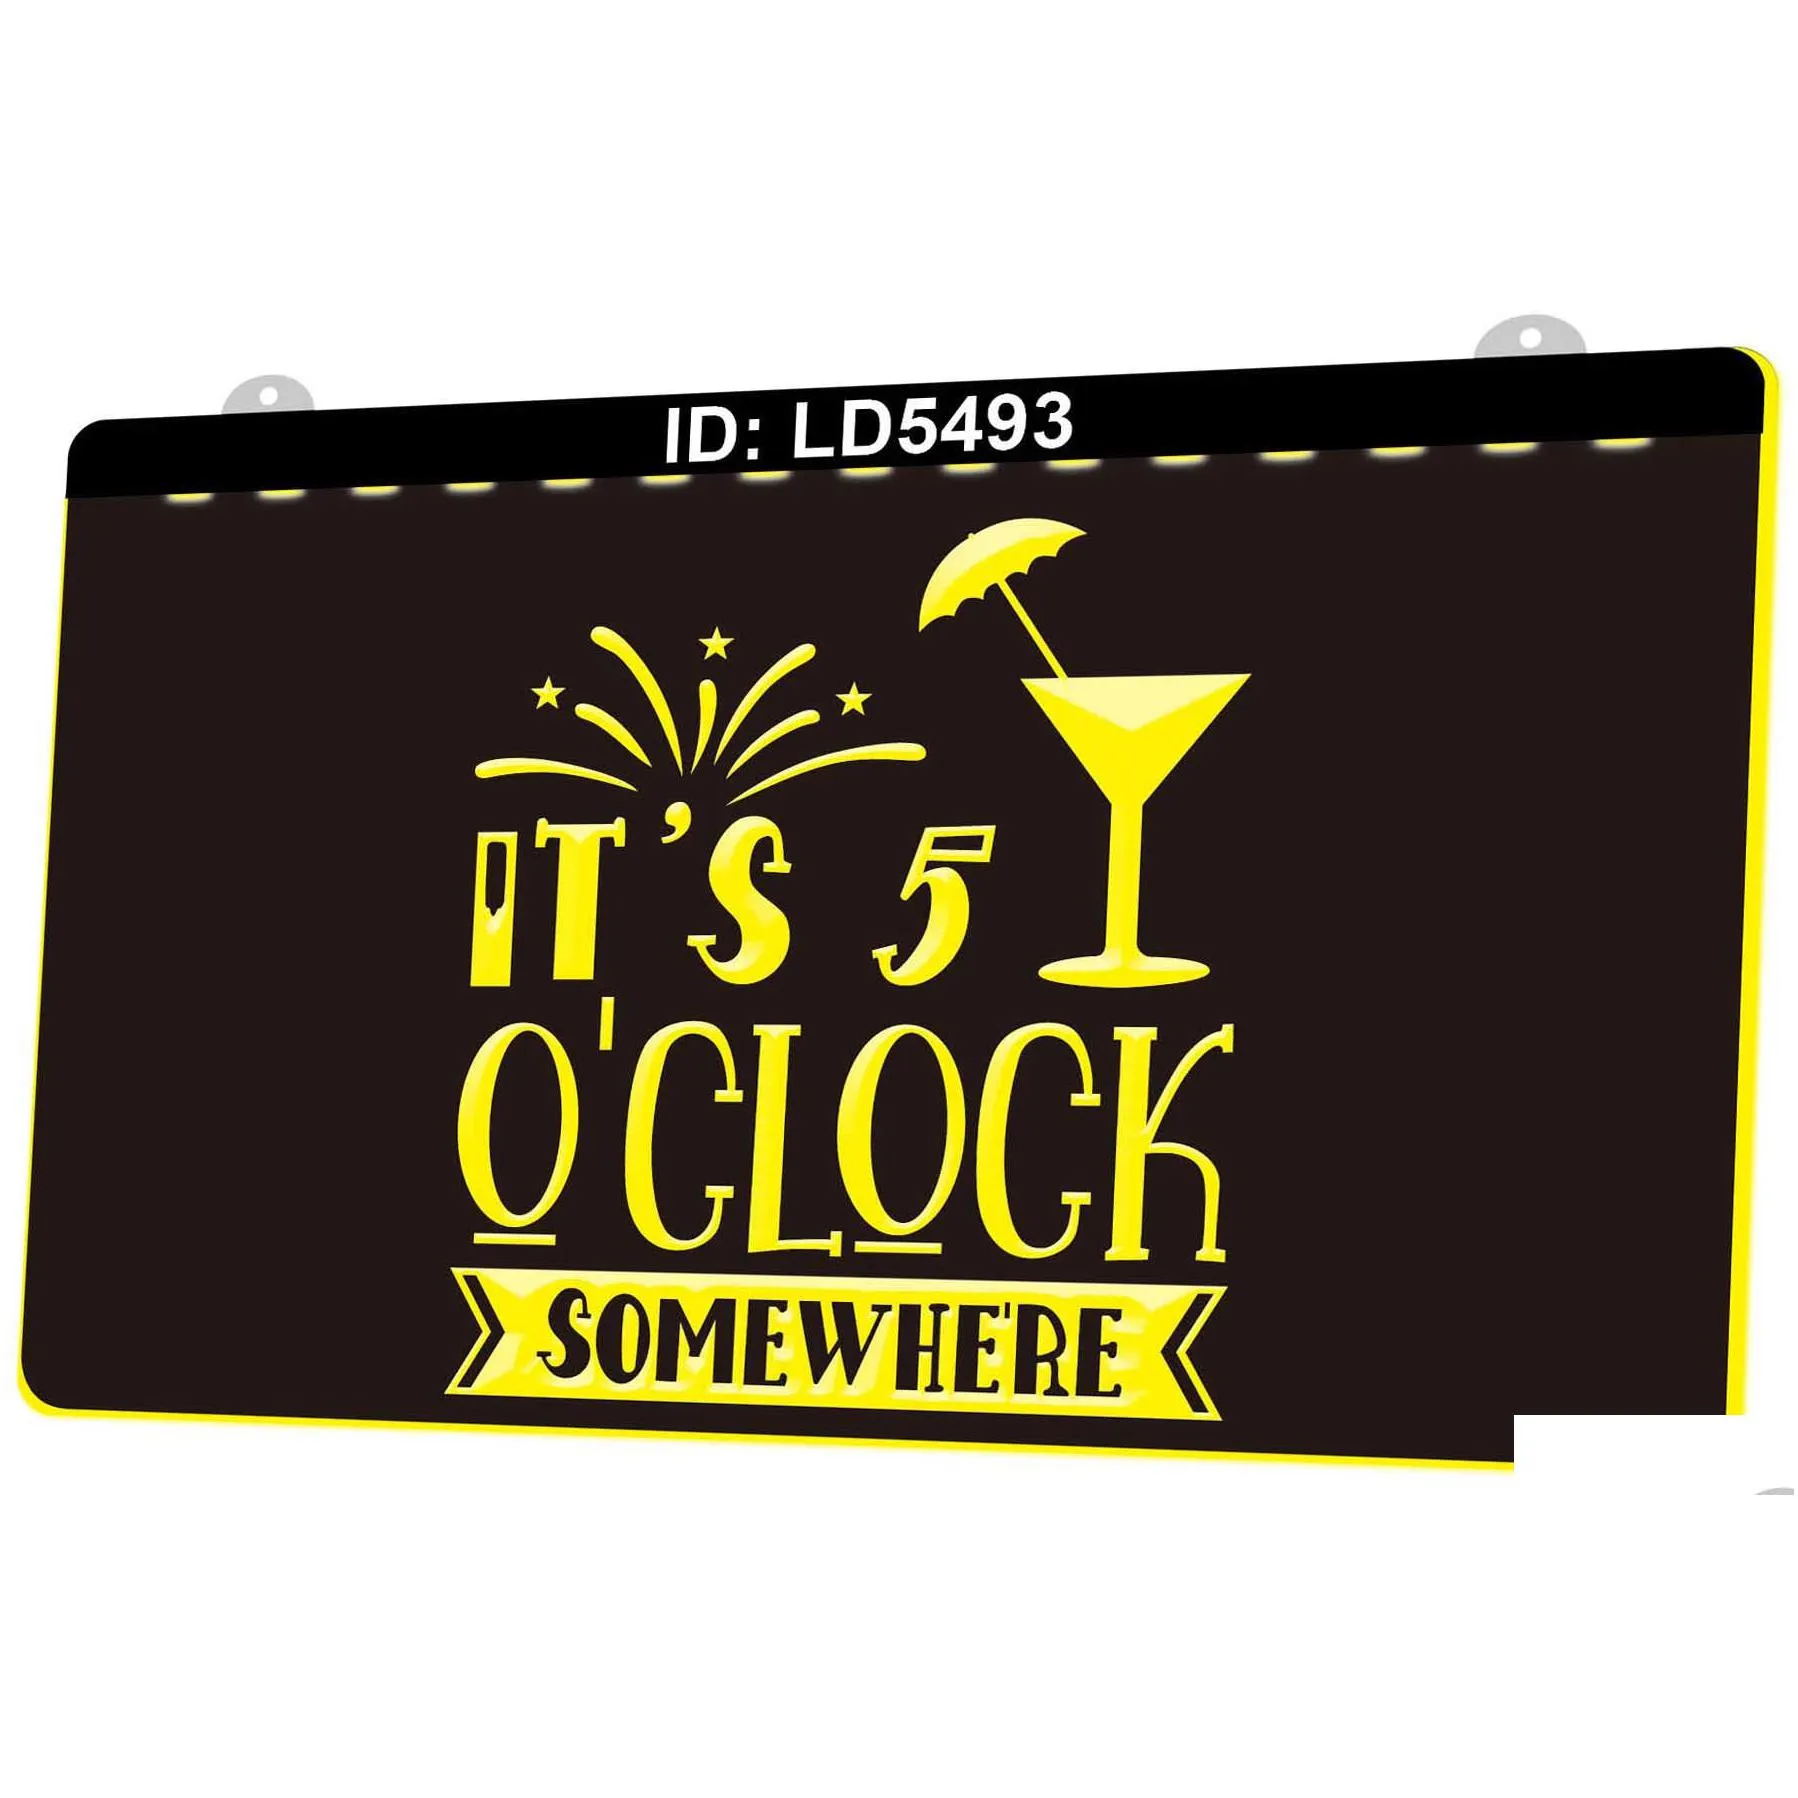 ld5493 its 5 oclock somewhere cocktails 3d engraving led light sign wholesale retail